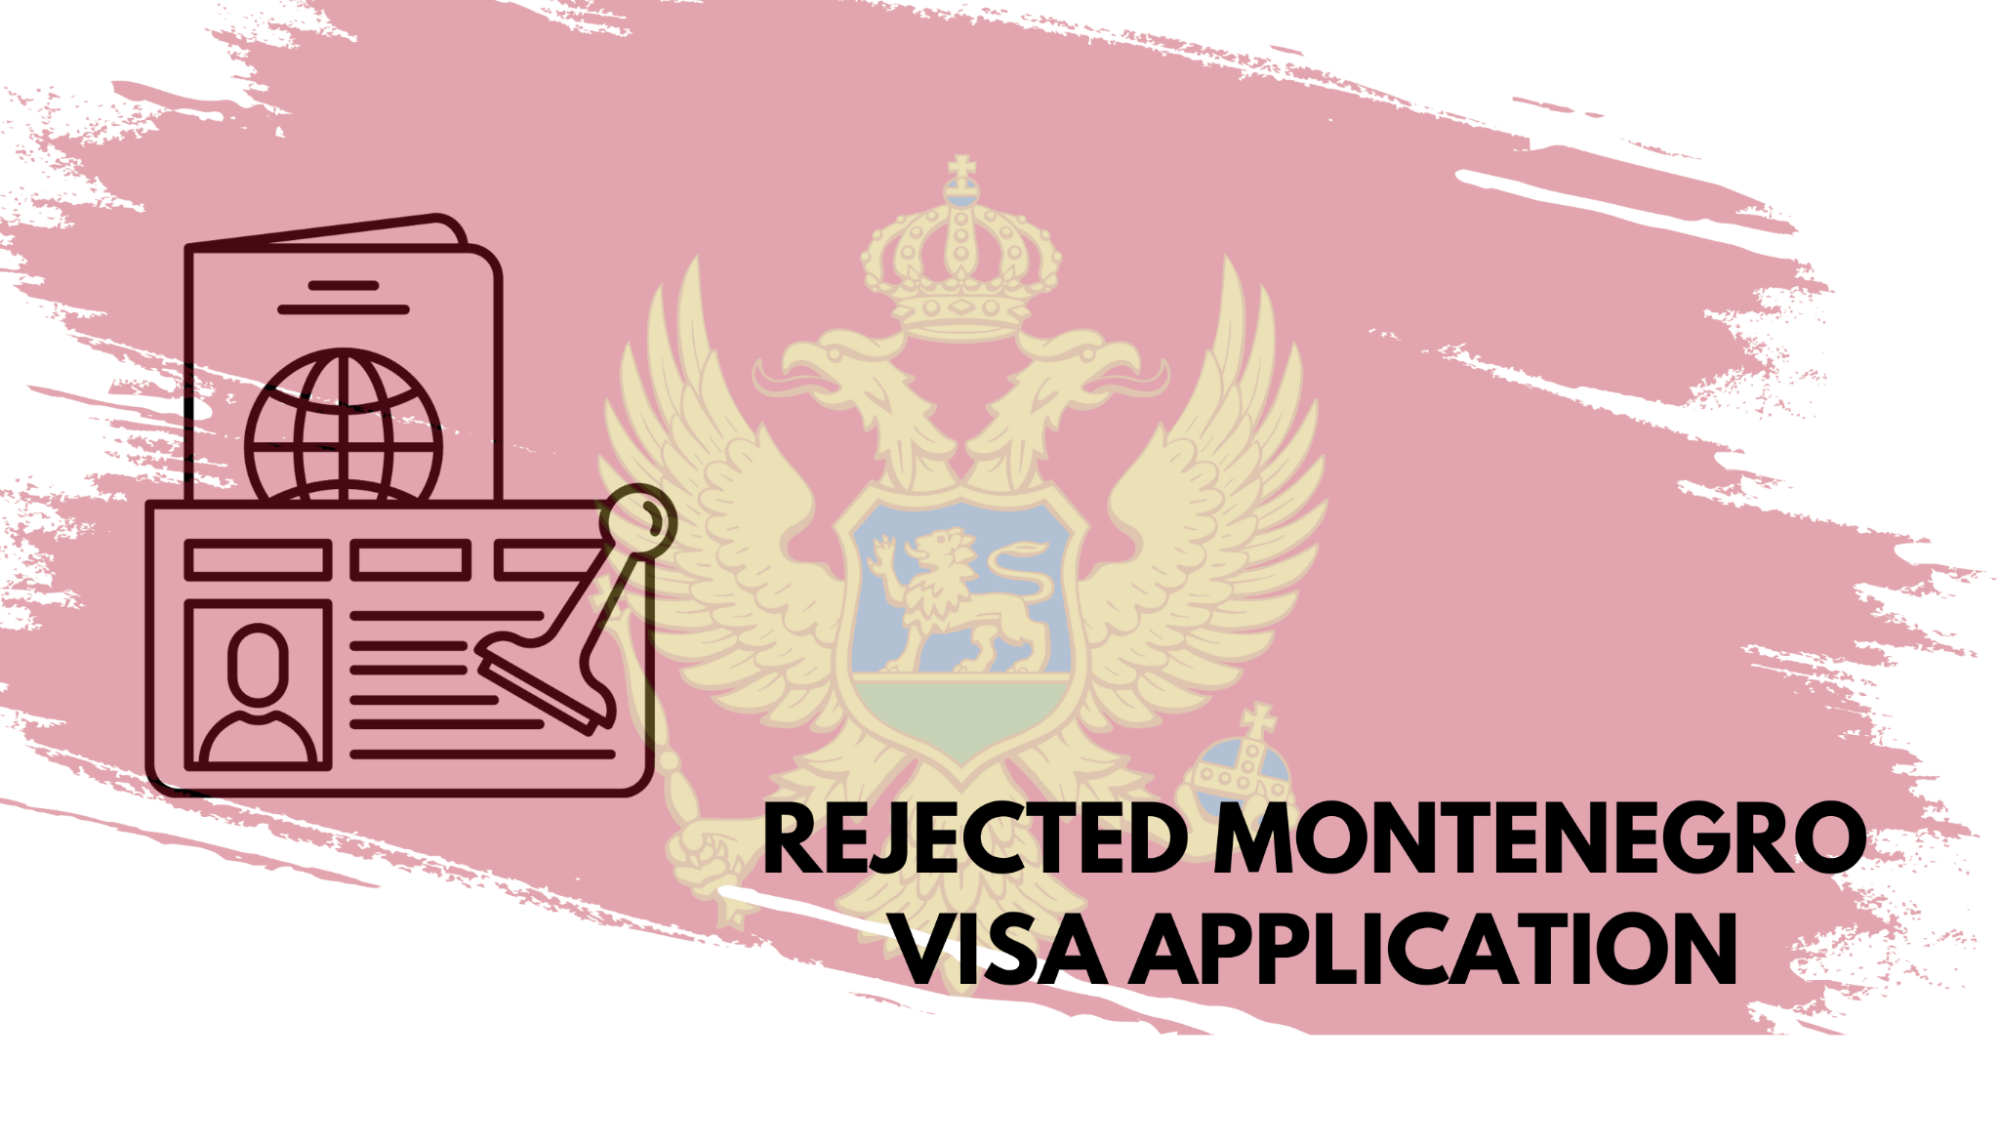 Dealing with a Rejected Montenegro Visa Application